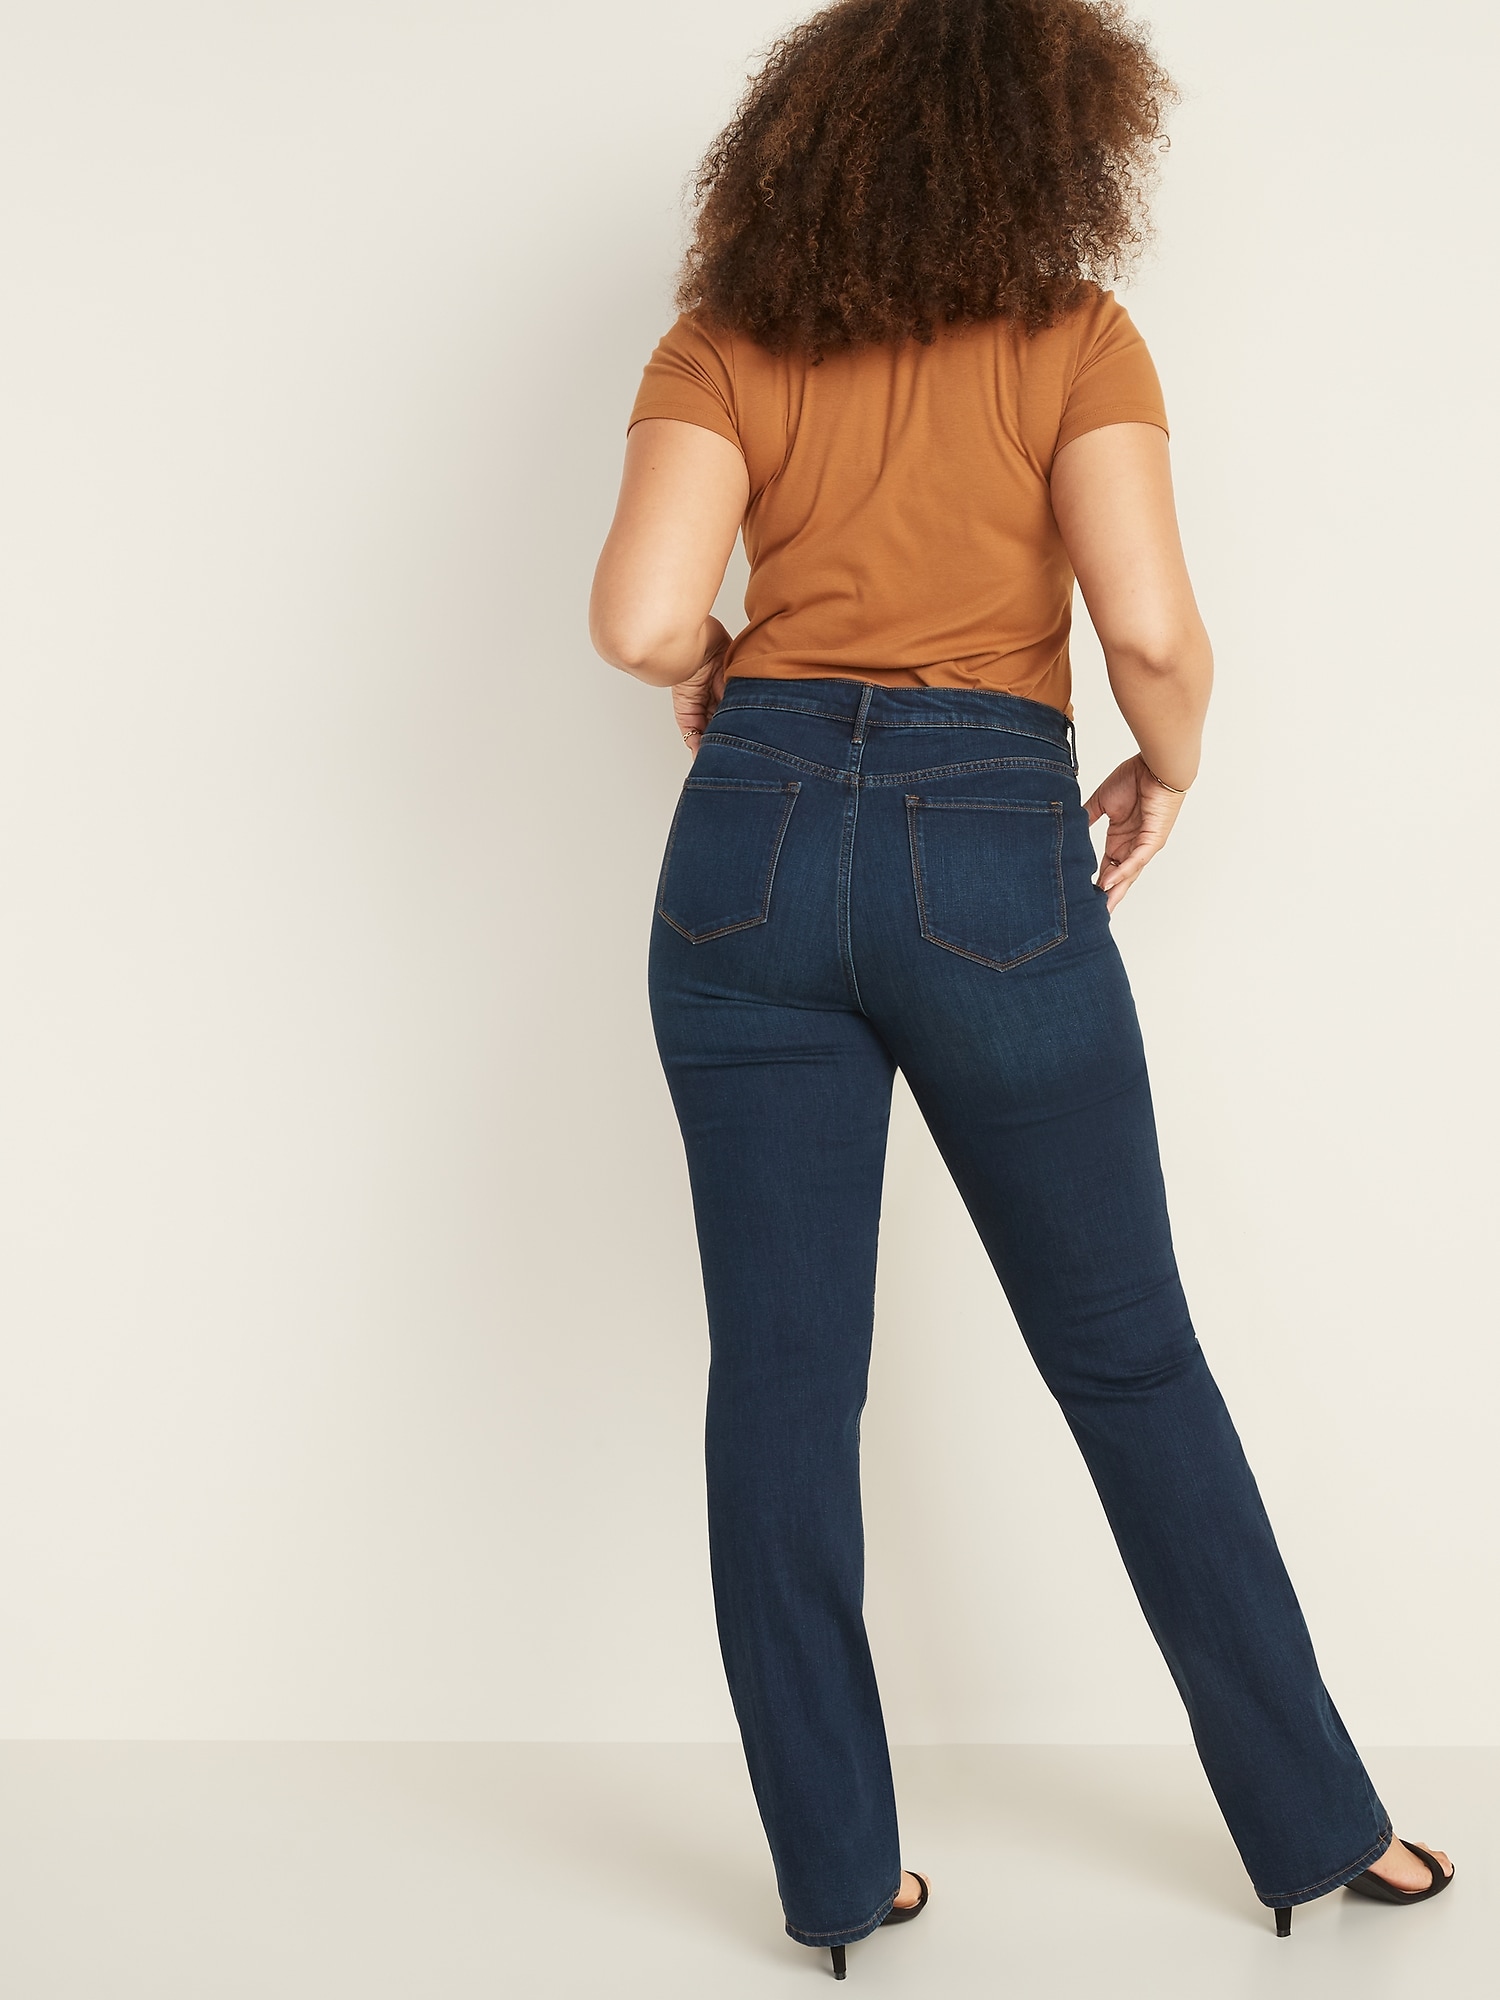 women's old navy boot cut jeans